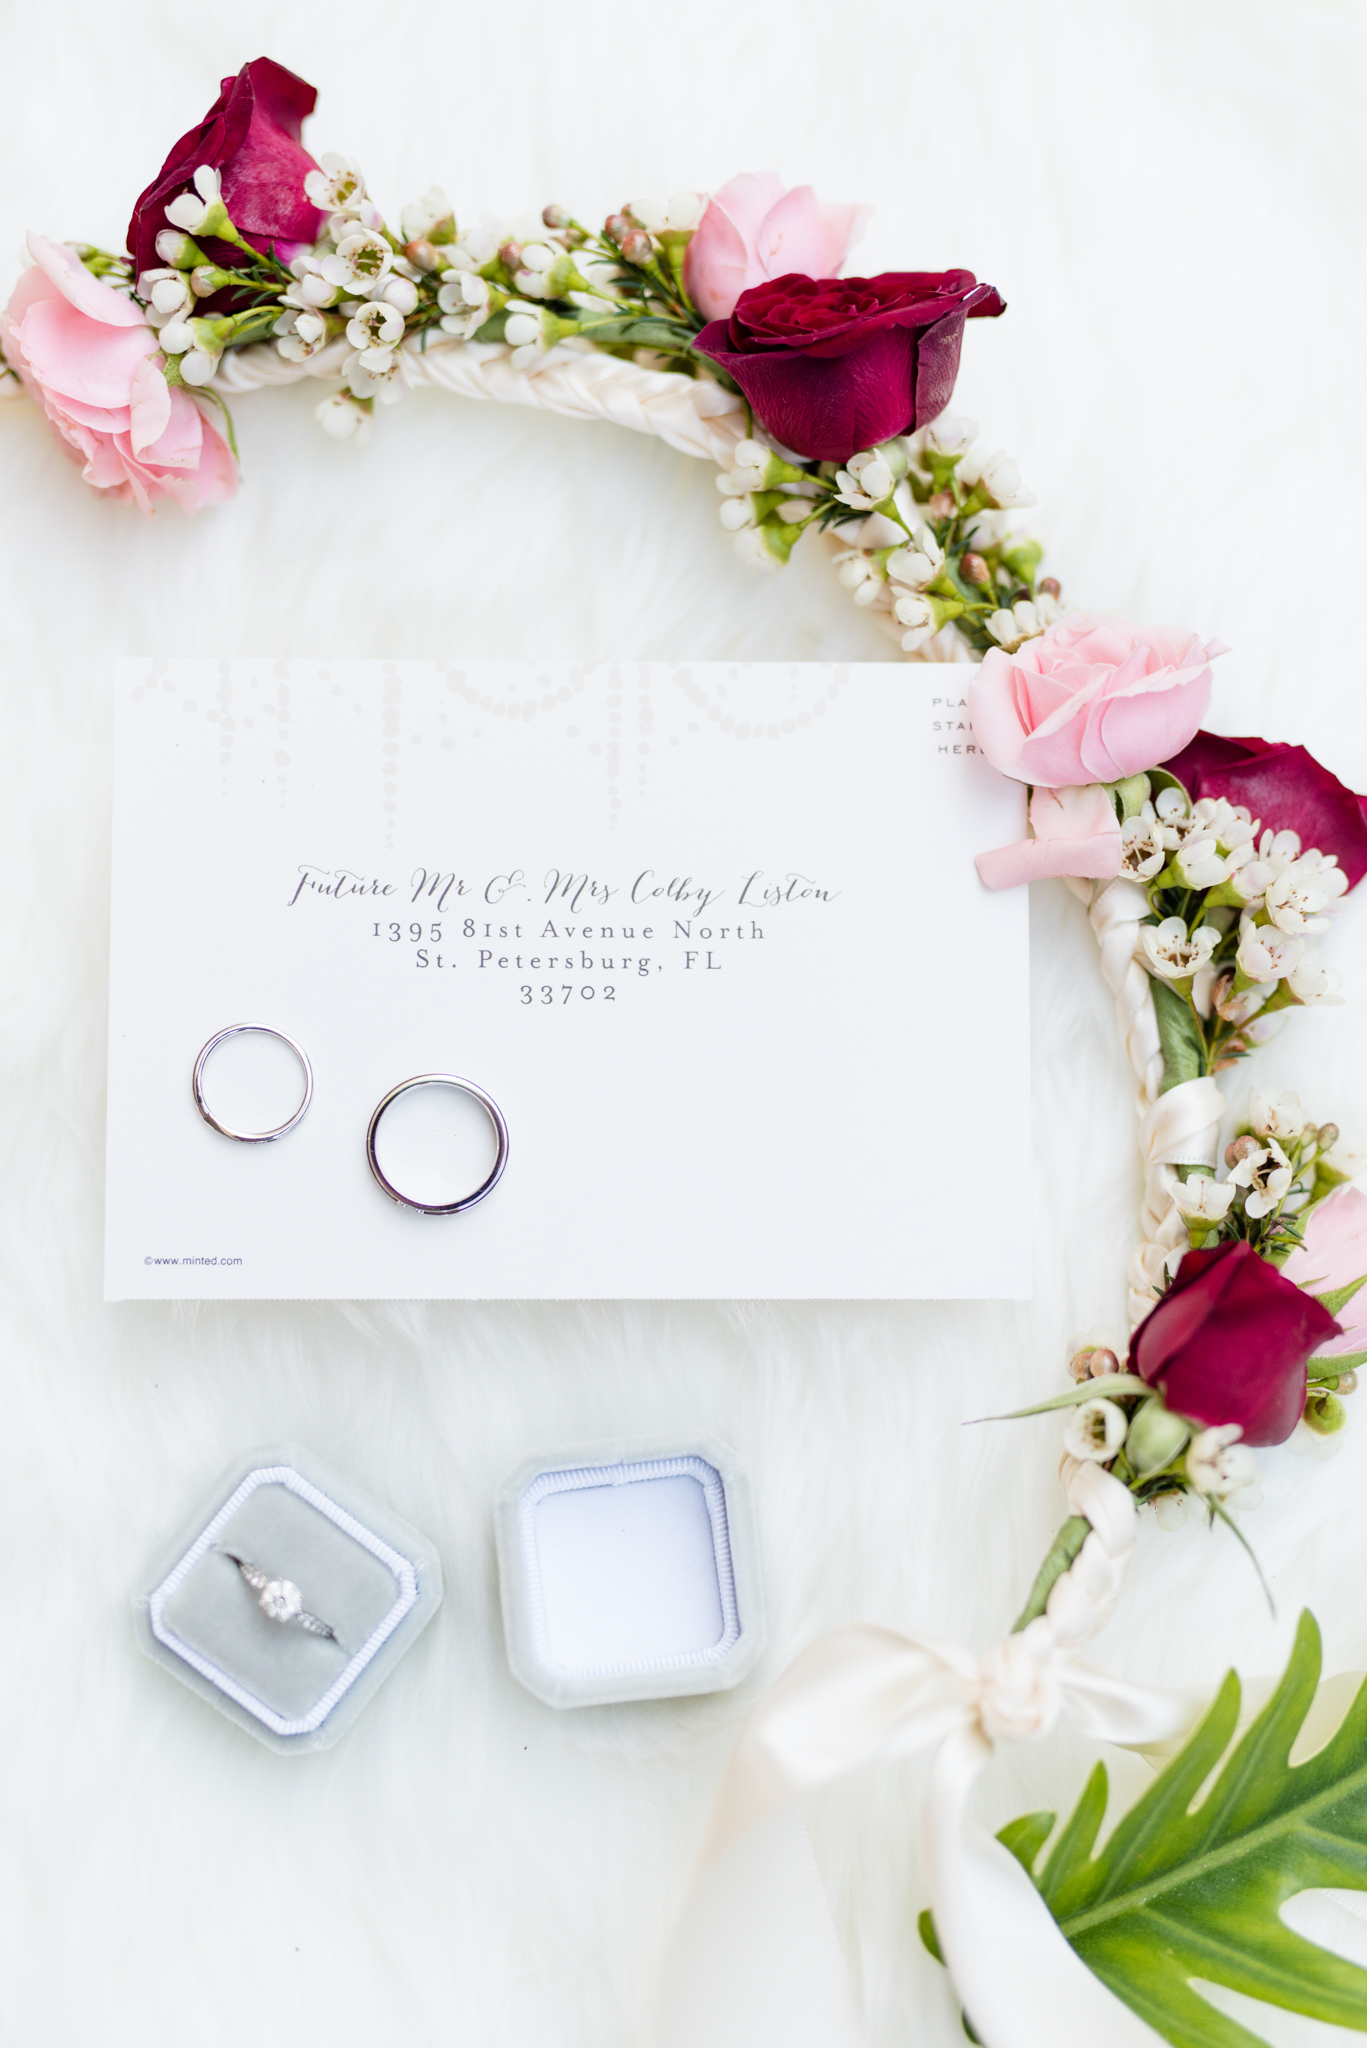 Rings and florals sit on invitations.